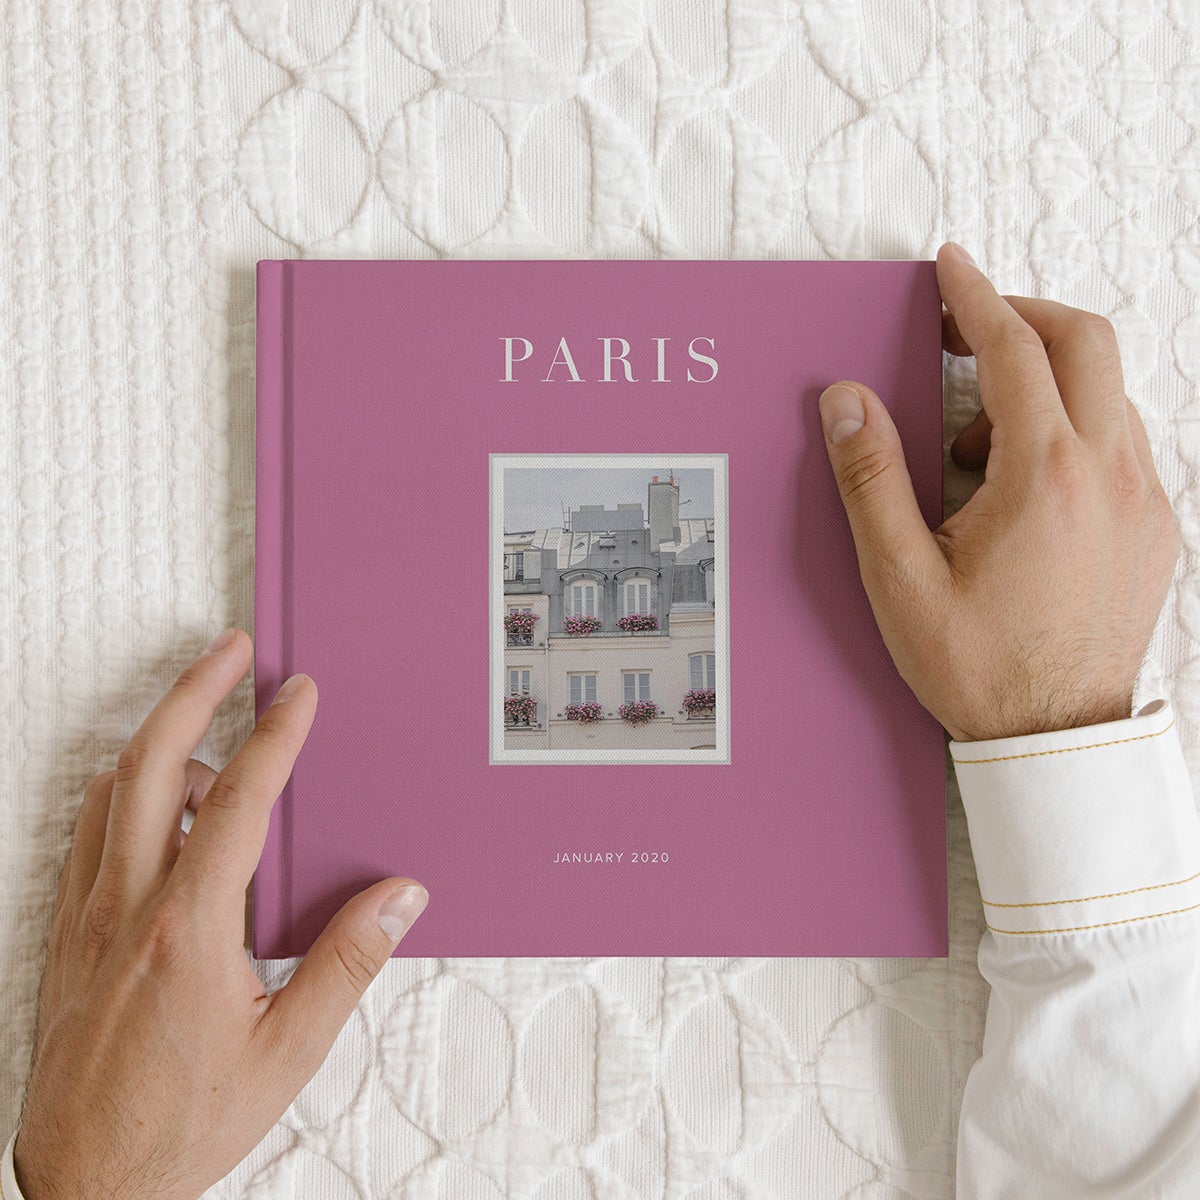 Artifact Uprising Photo-Wrapped Hardcover Book titled Paris featuring photo of Parisian architecture